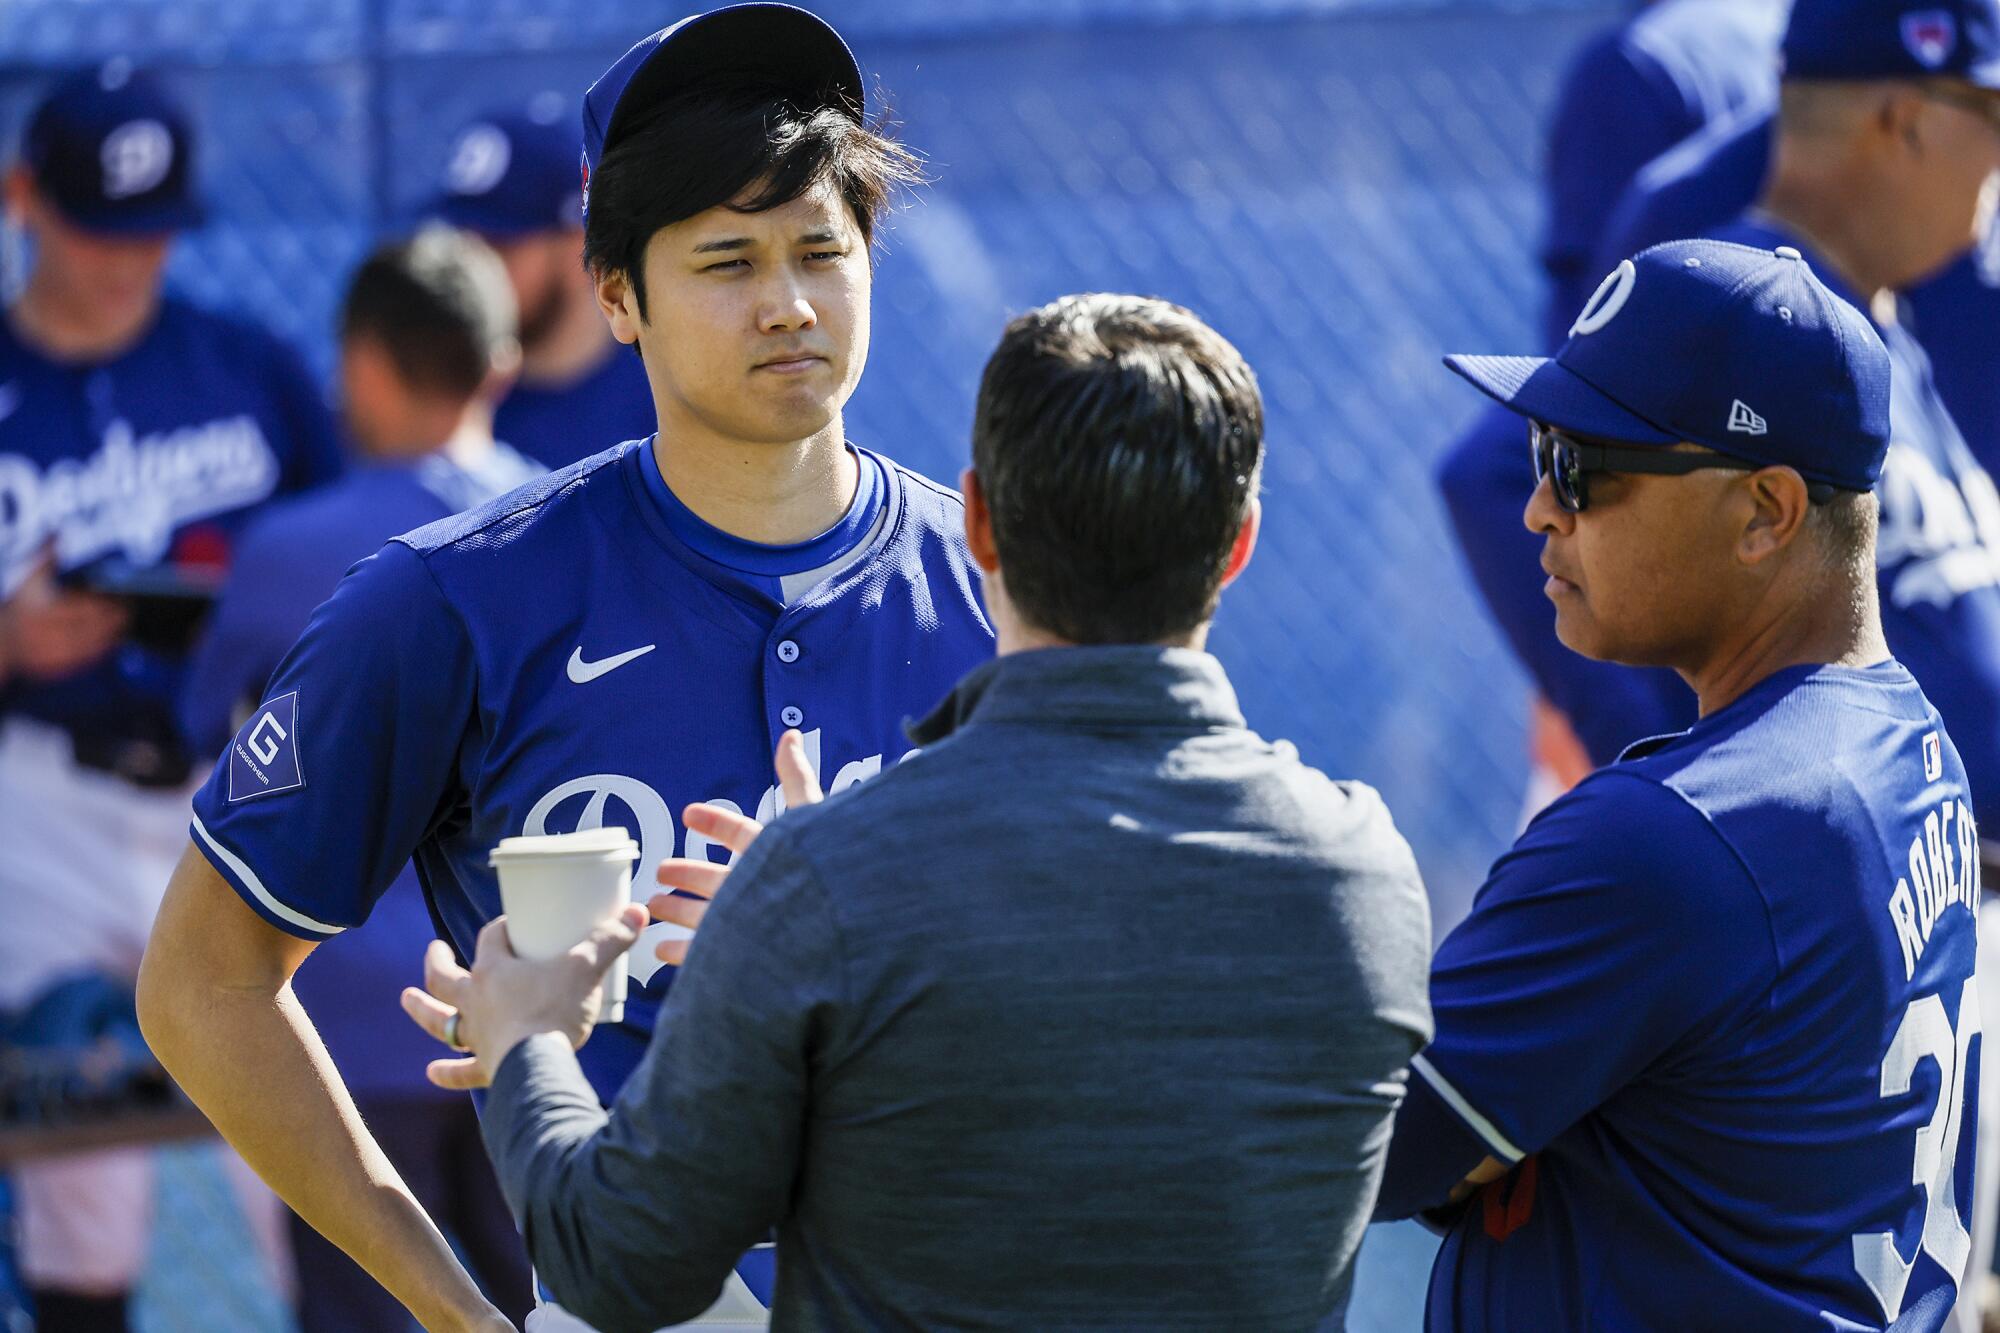 Dodgers manager Dave Roberts, right, and team executive Andrew Friedman, center, talk to two-way star Shohei Ohtani.